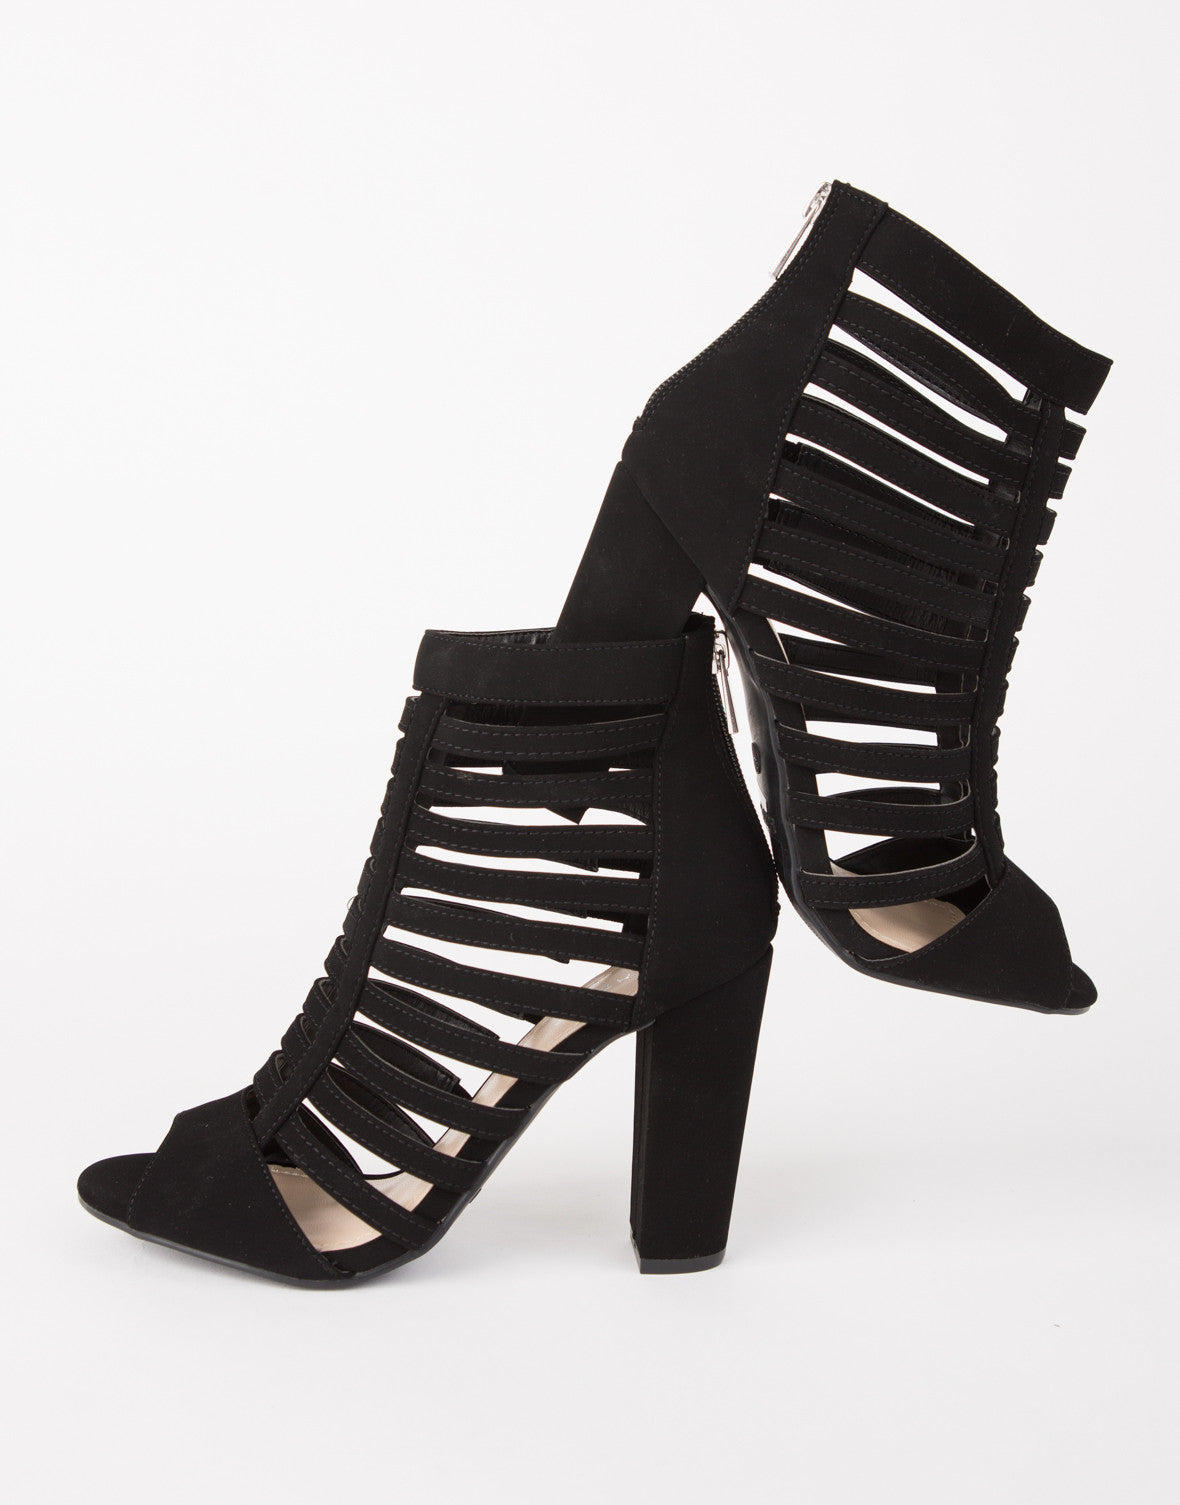 All the Way Strapped Heels - Black 